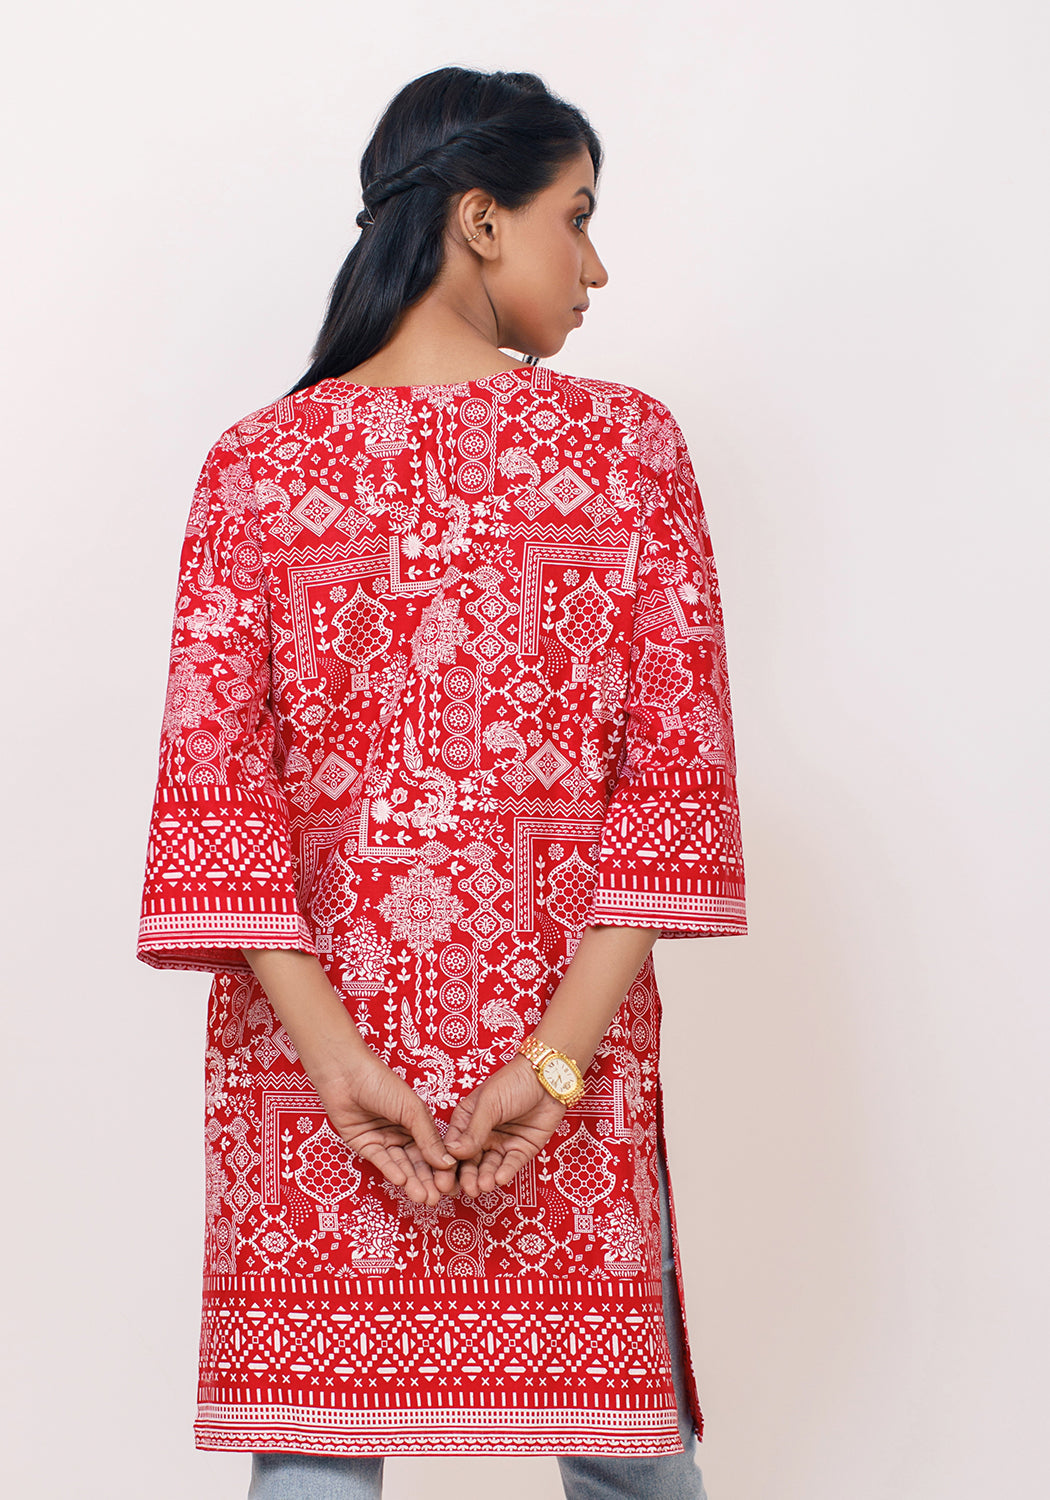 Arzoo Red and White Lawn Kurti